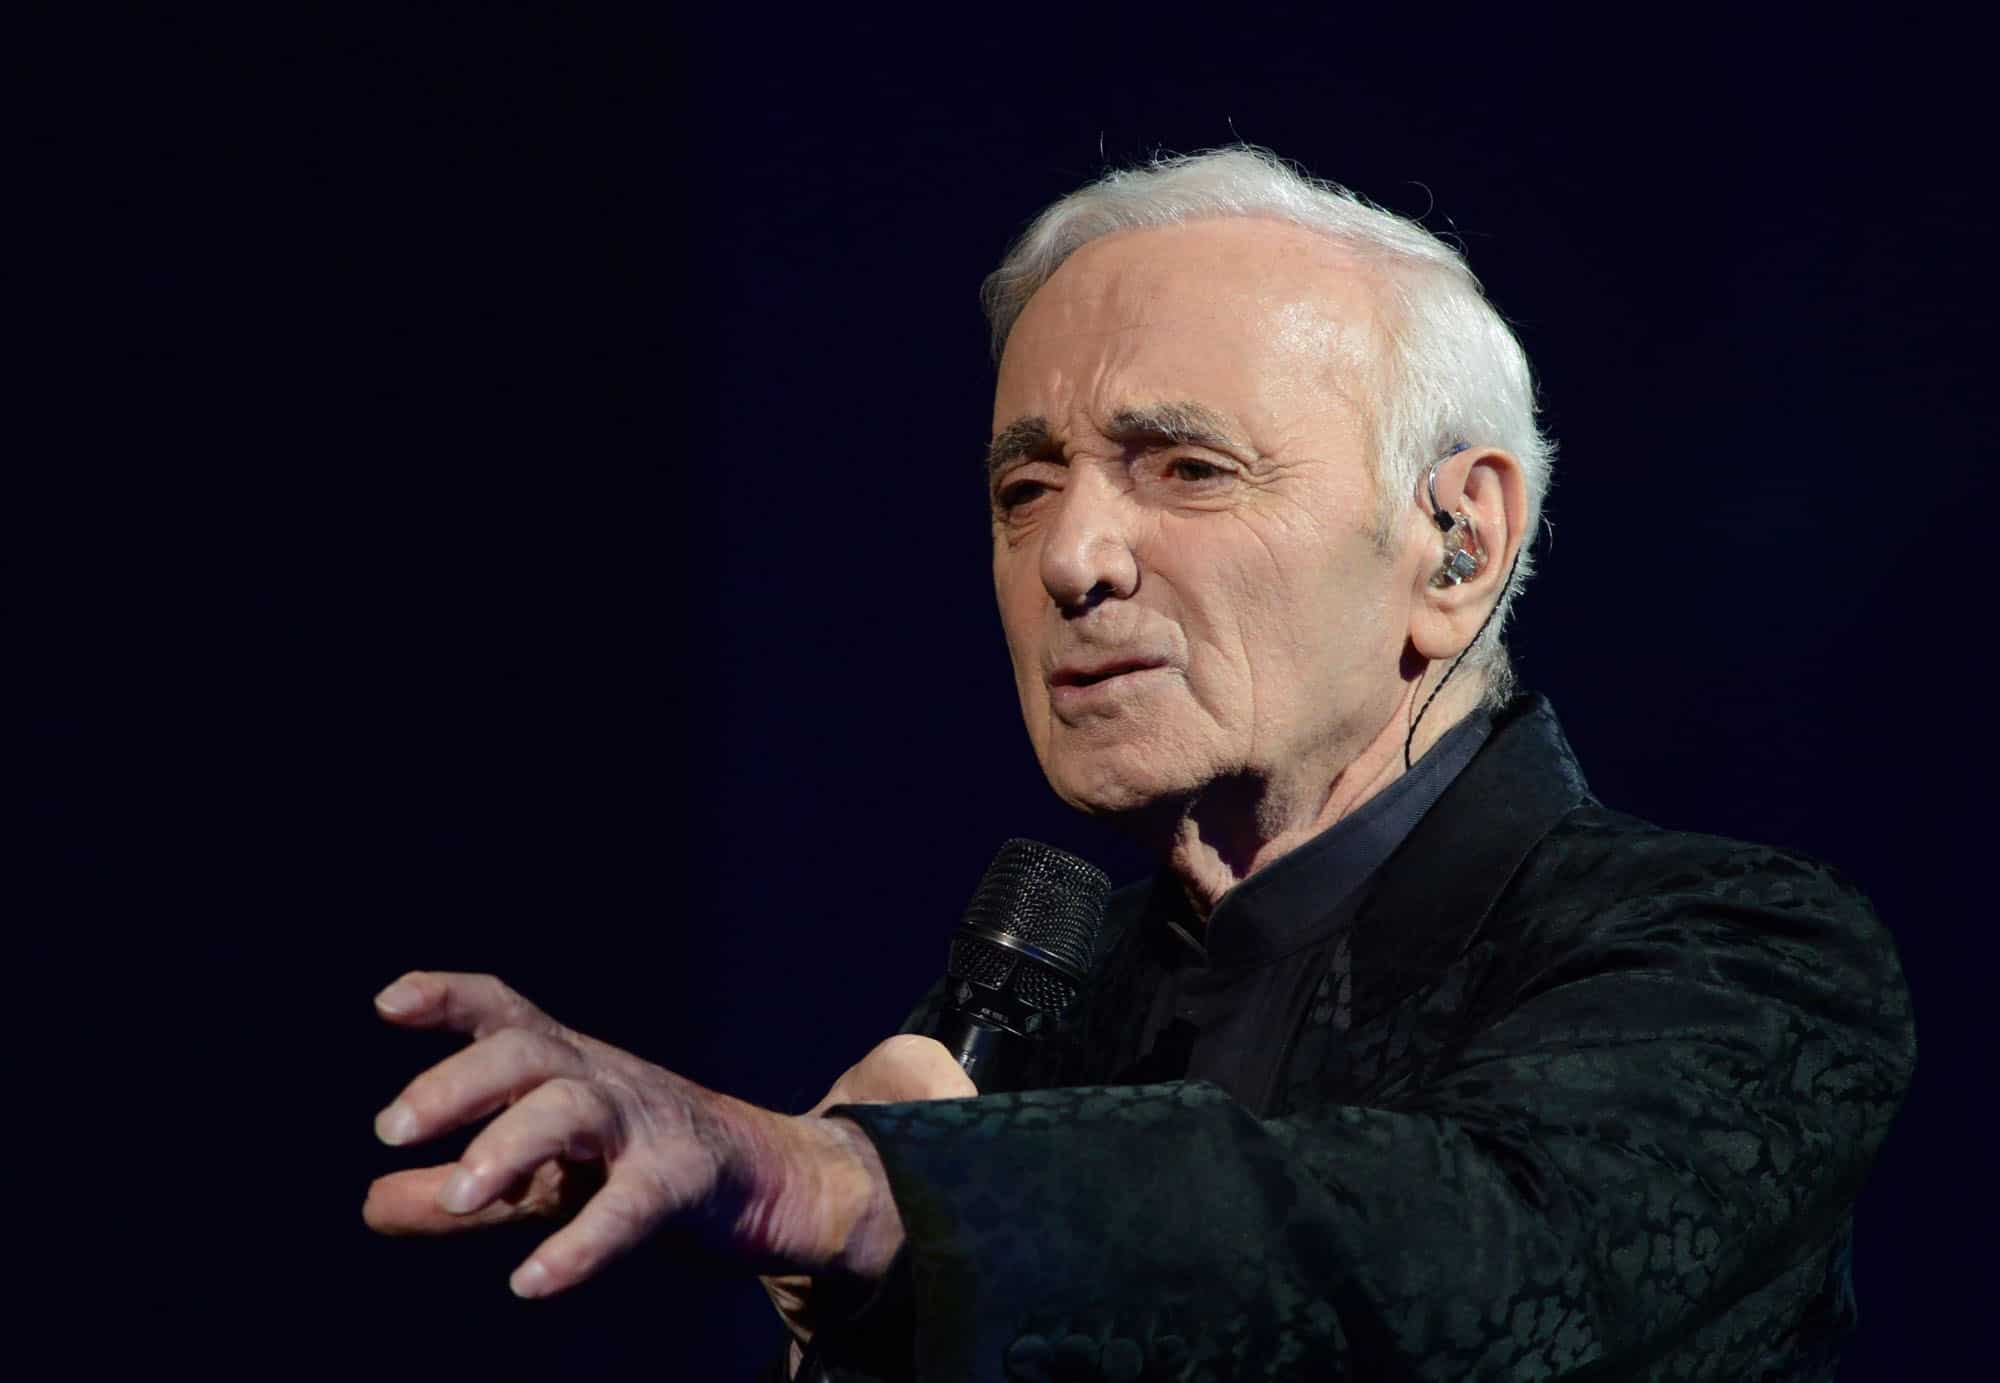 5 French musicians to make you love learning french with music charles aznavour